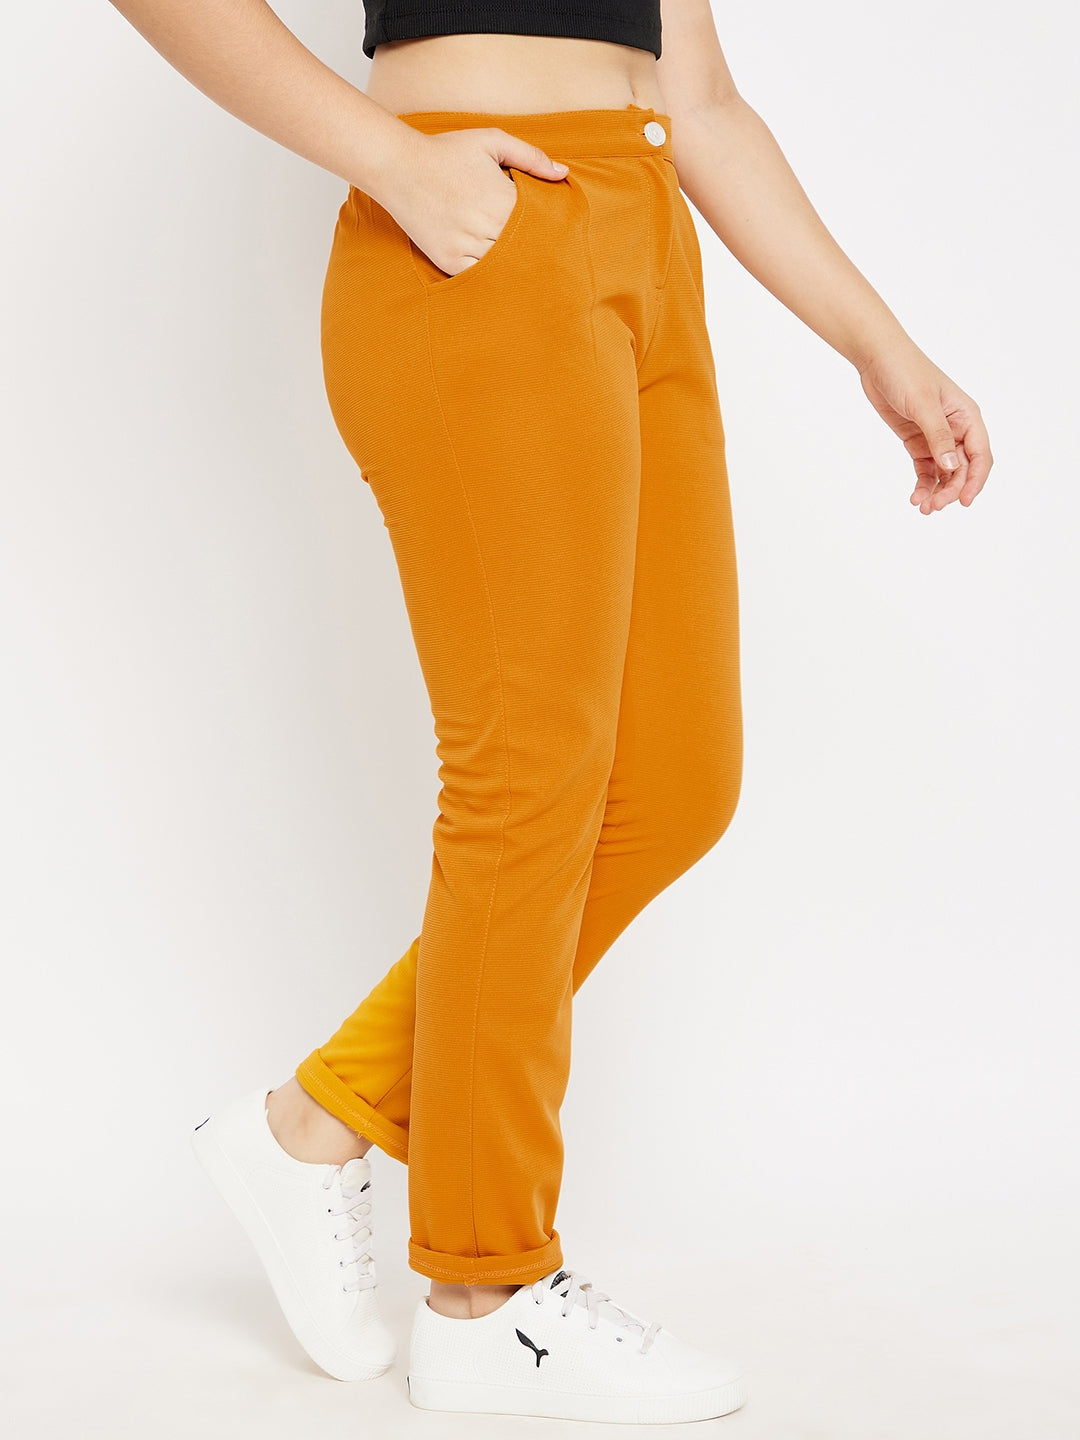 Buy the Womens Yellow Flat Front Pockets Regular Fit Skinny Leg Ankle Pants  Size 0 | GoodwillFinds